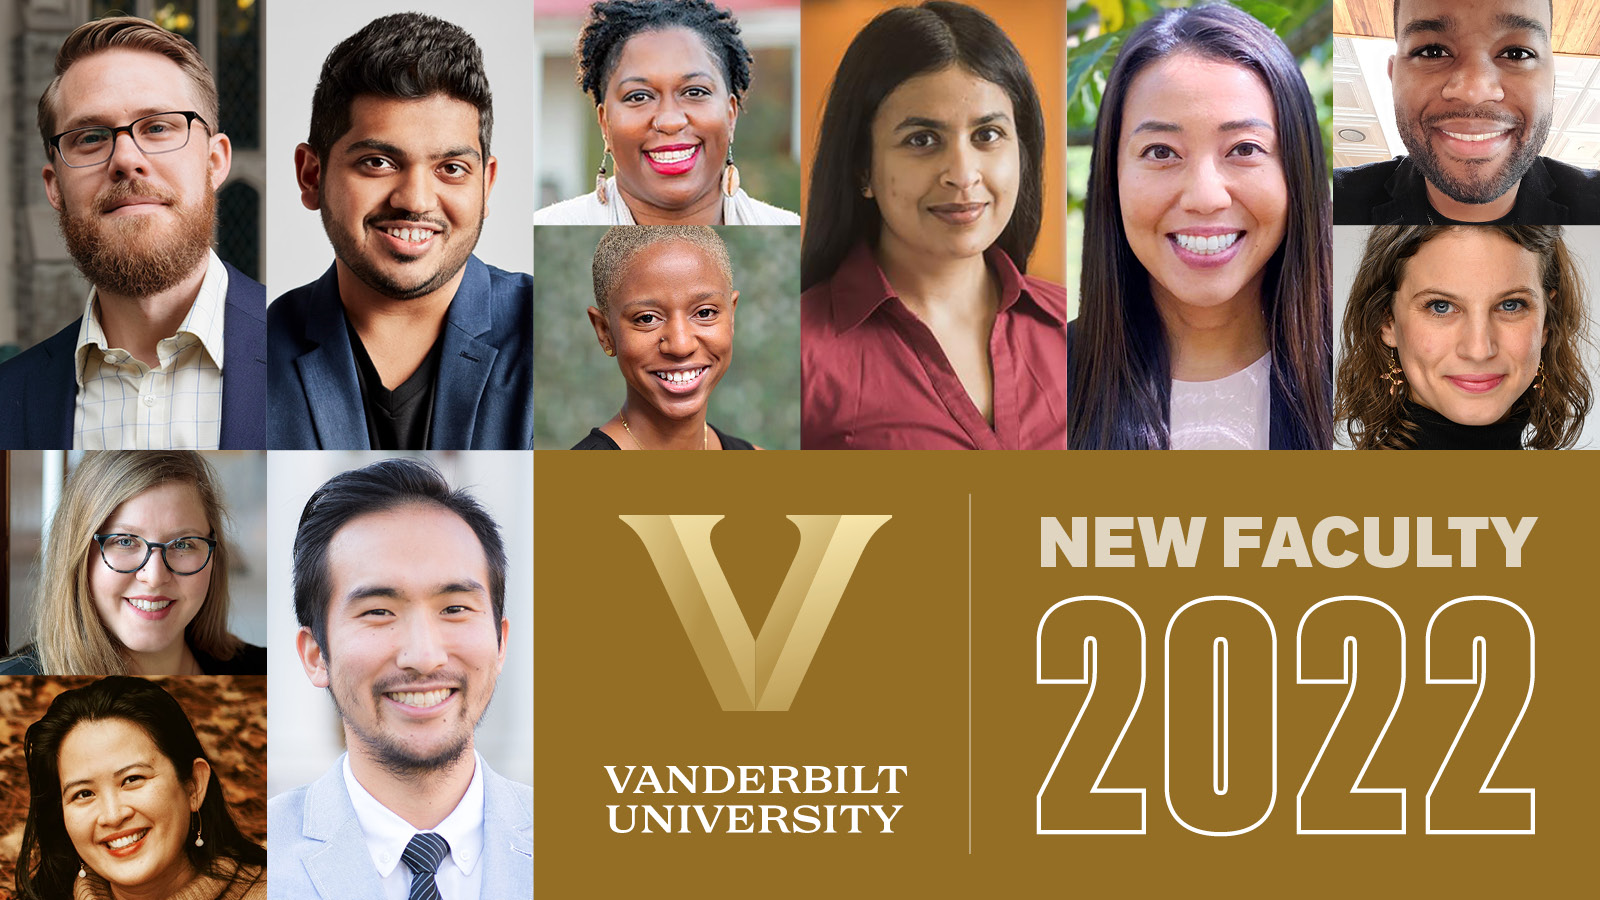 NEW FACULTY: Vanderbilt’s newest faculty share their unique academic collaborations